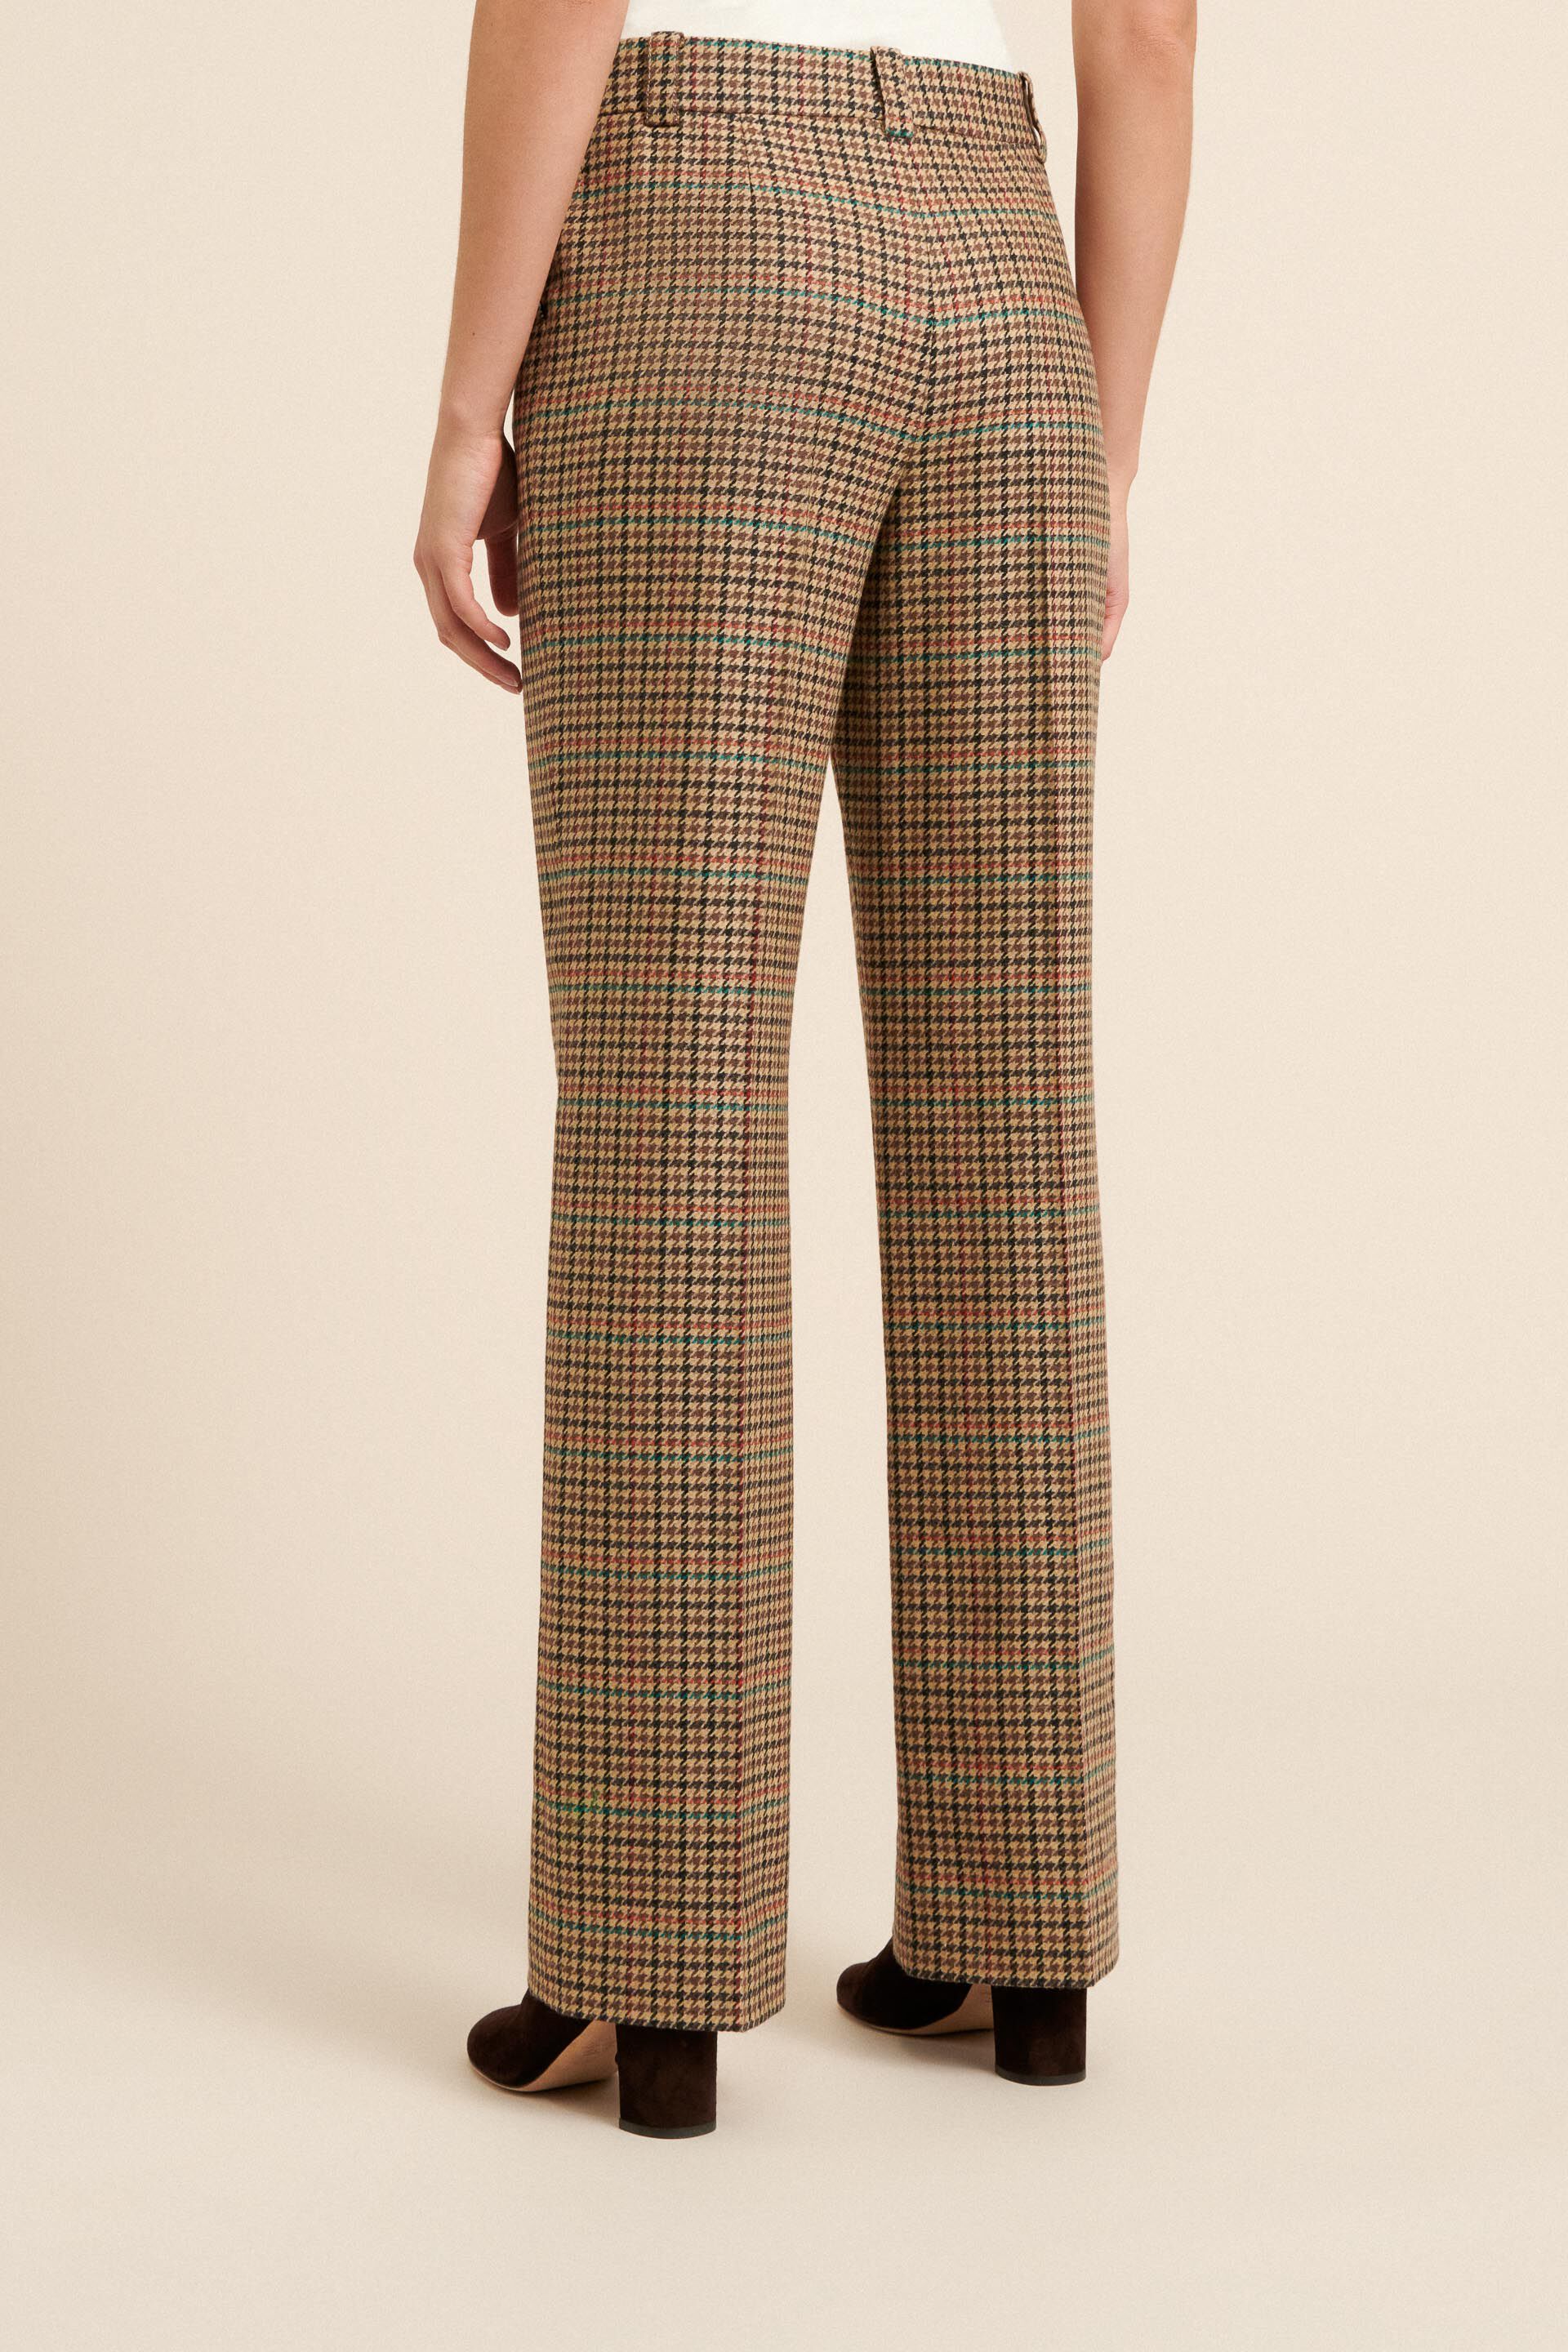 Ossigeno - Houndstooth trousers | Luisa 